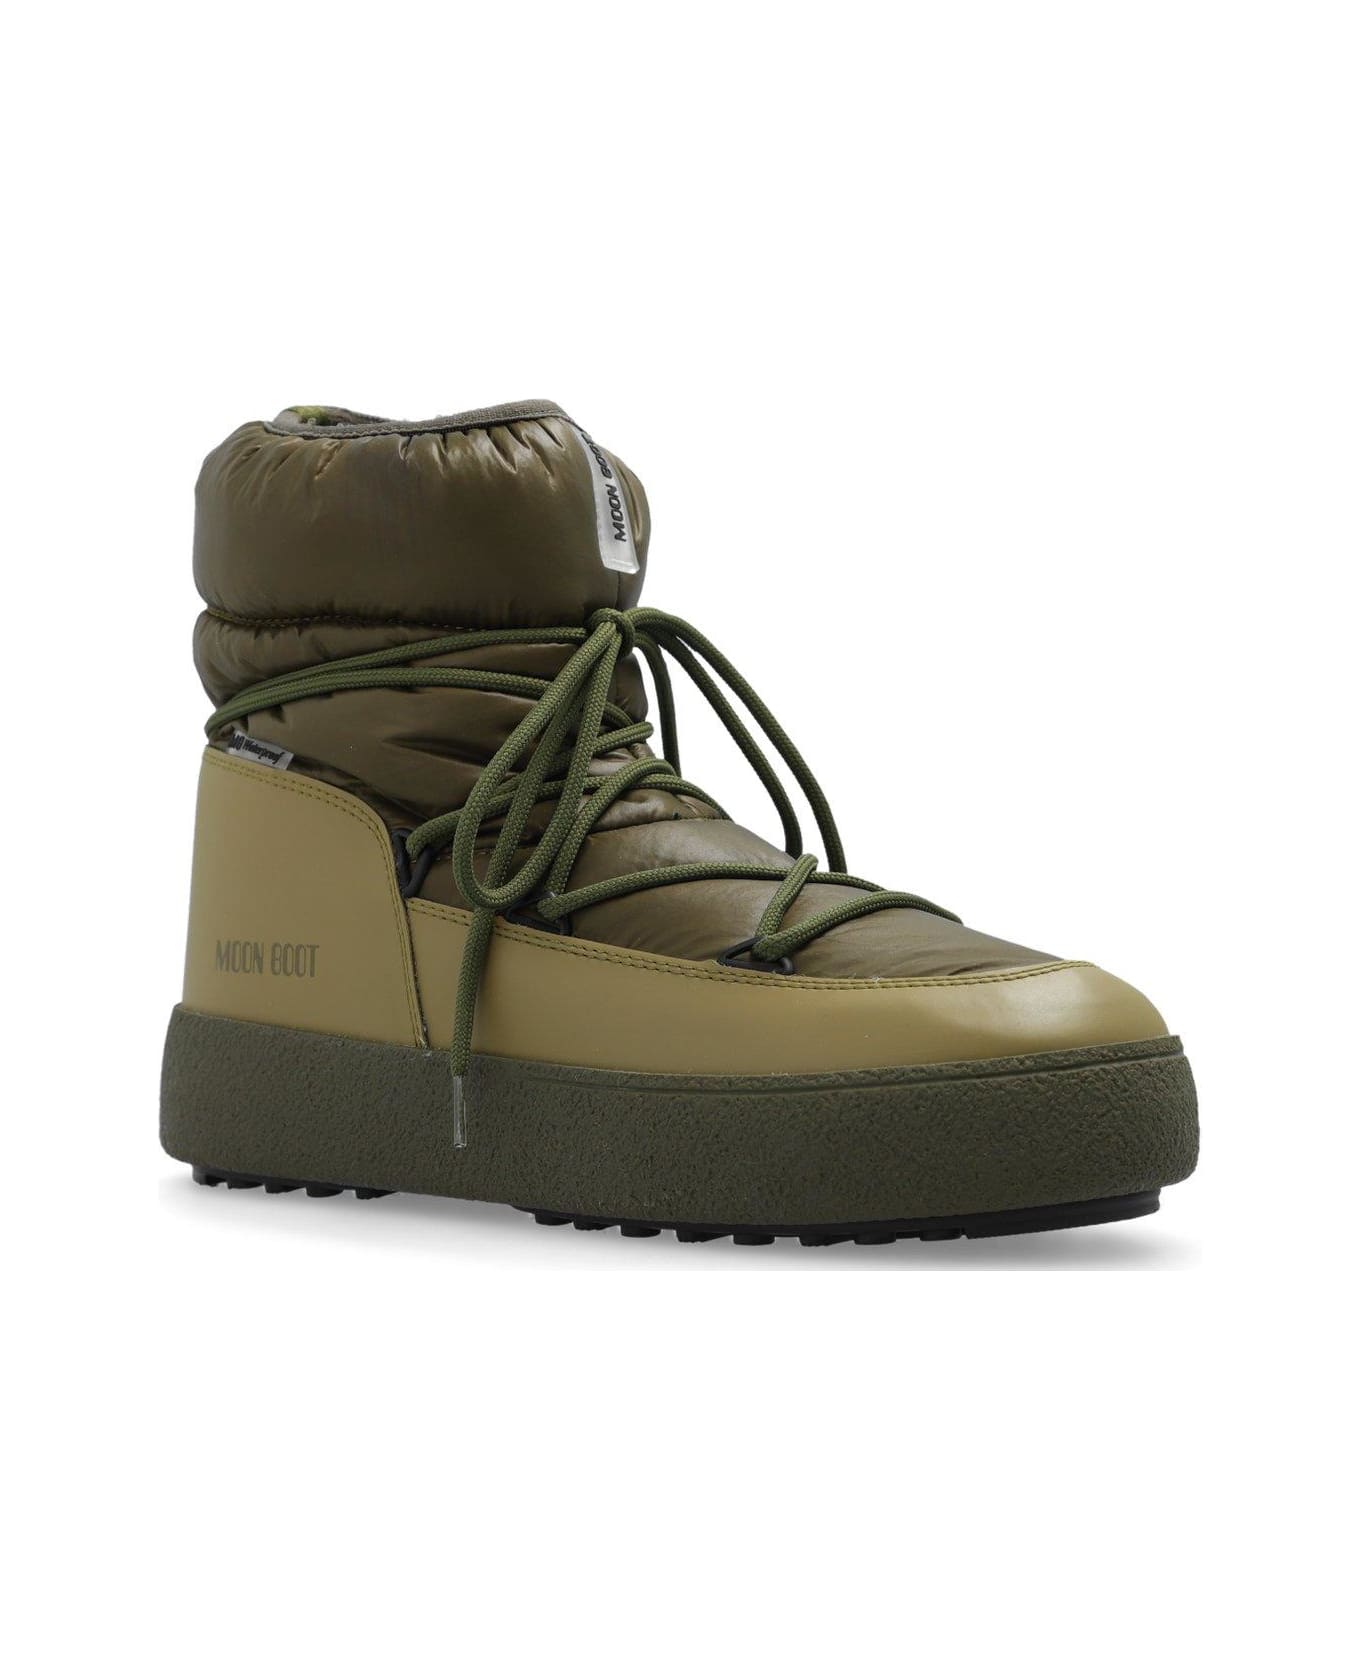 Moon Boot Mtrack Low Padded Boots - Verde ブーツ